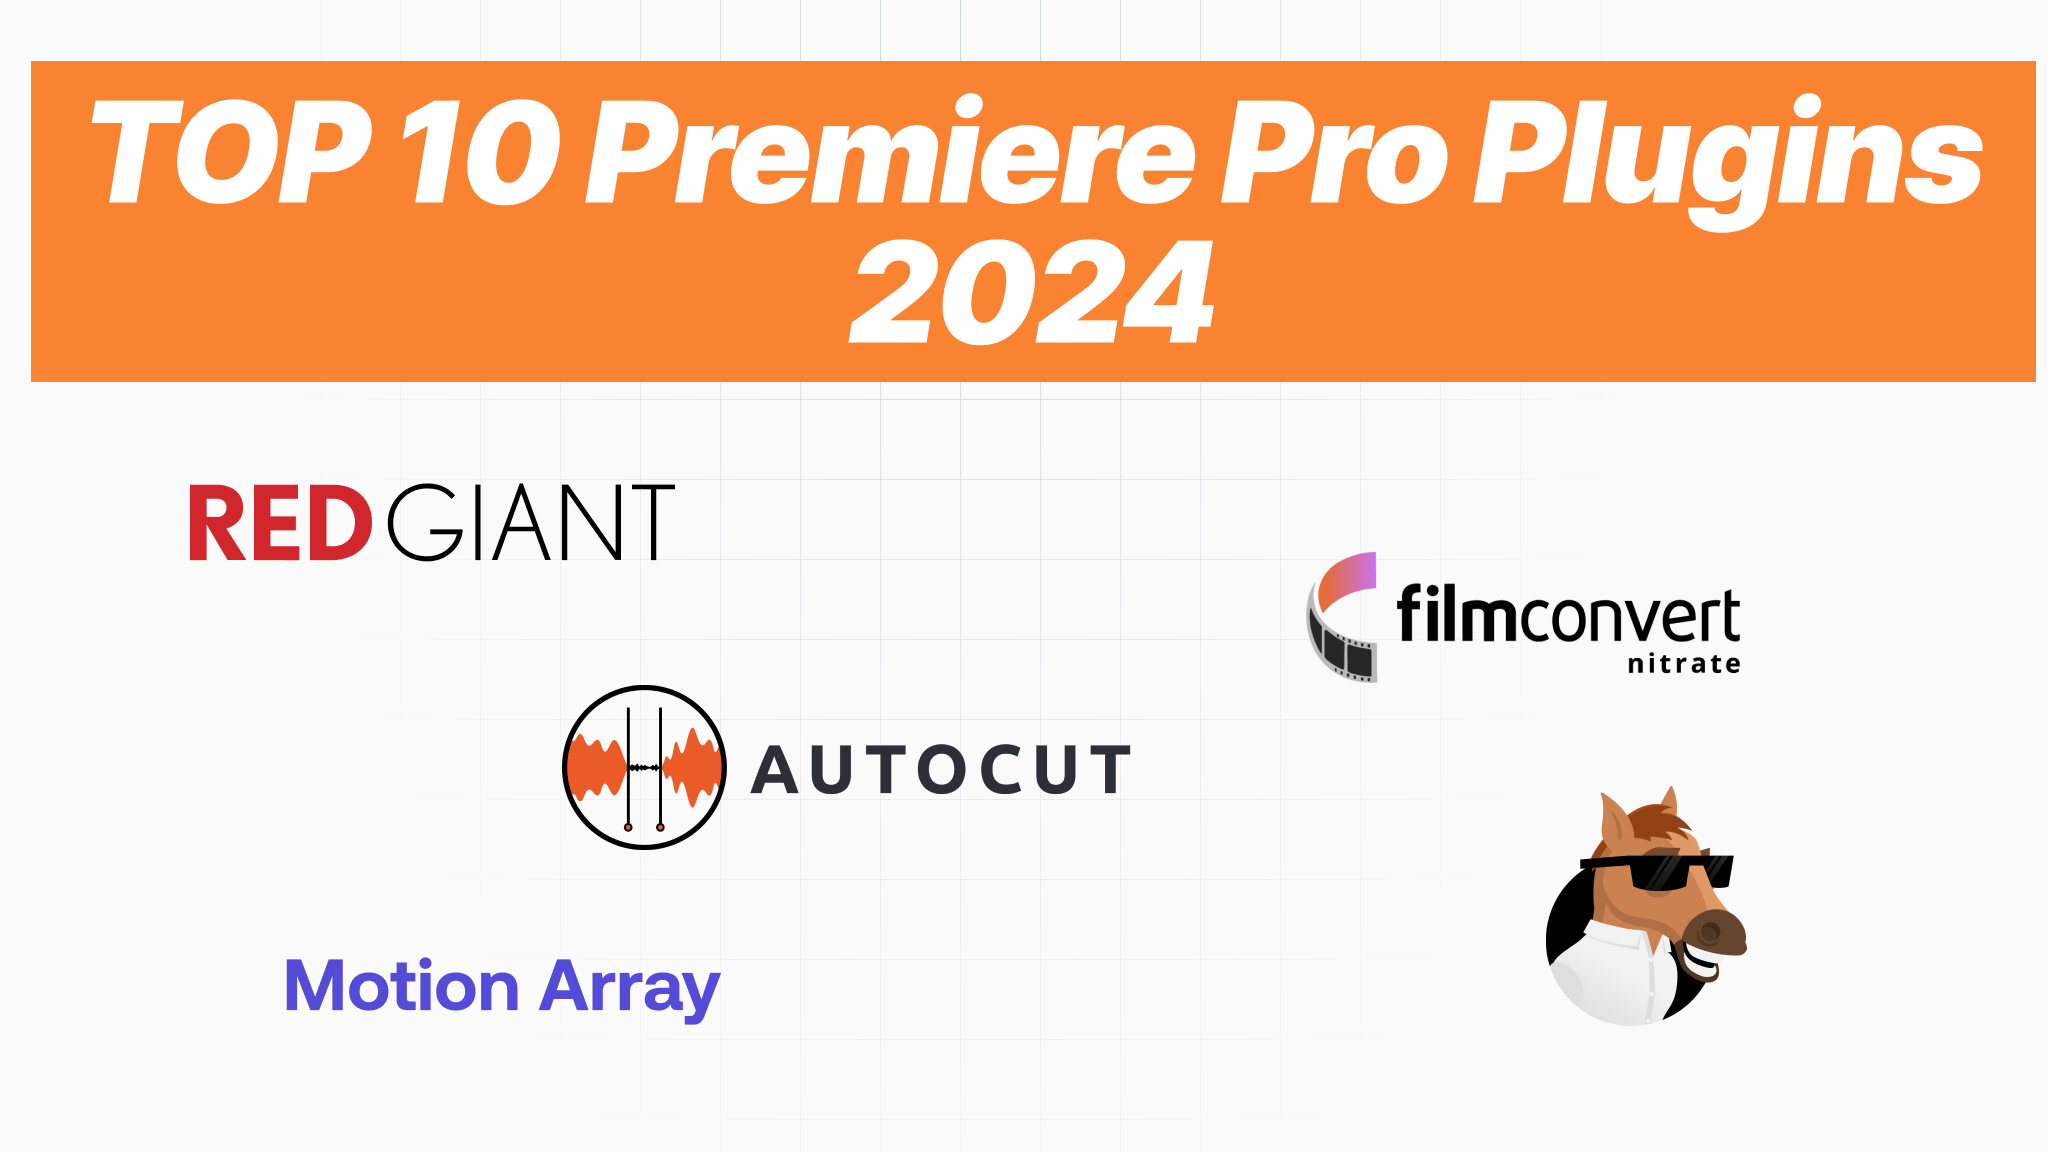 Top 10 Premier Pro Plugins 2024 - Elevate Your Video Editing Workflow